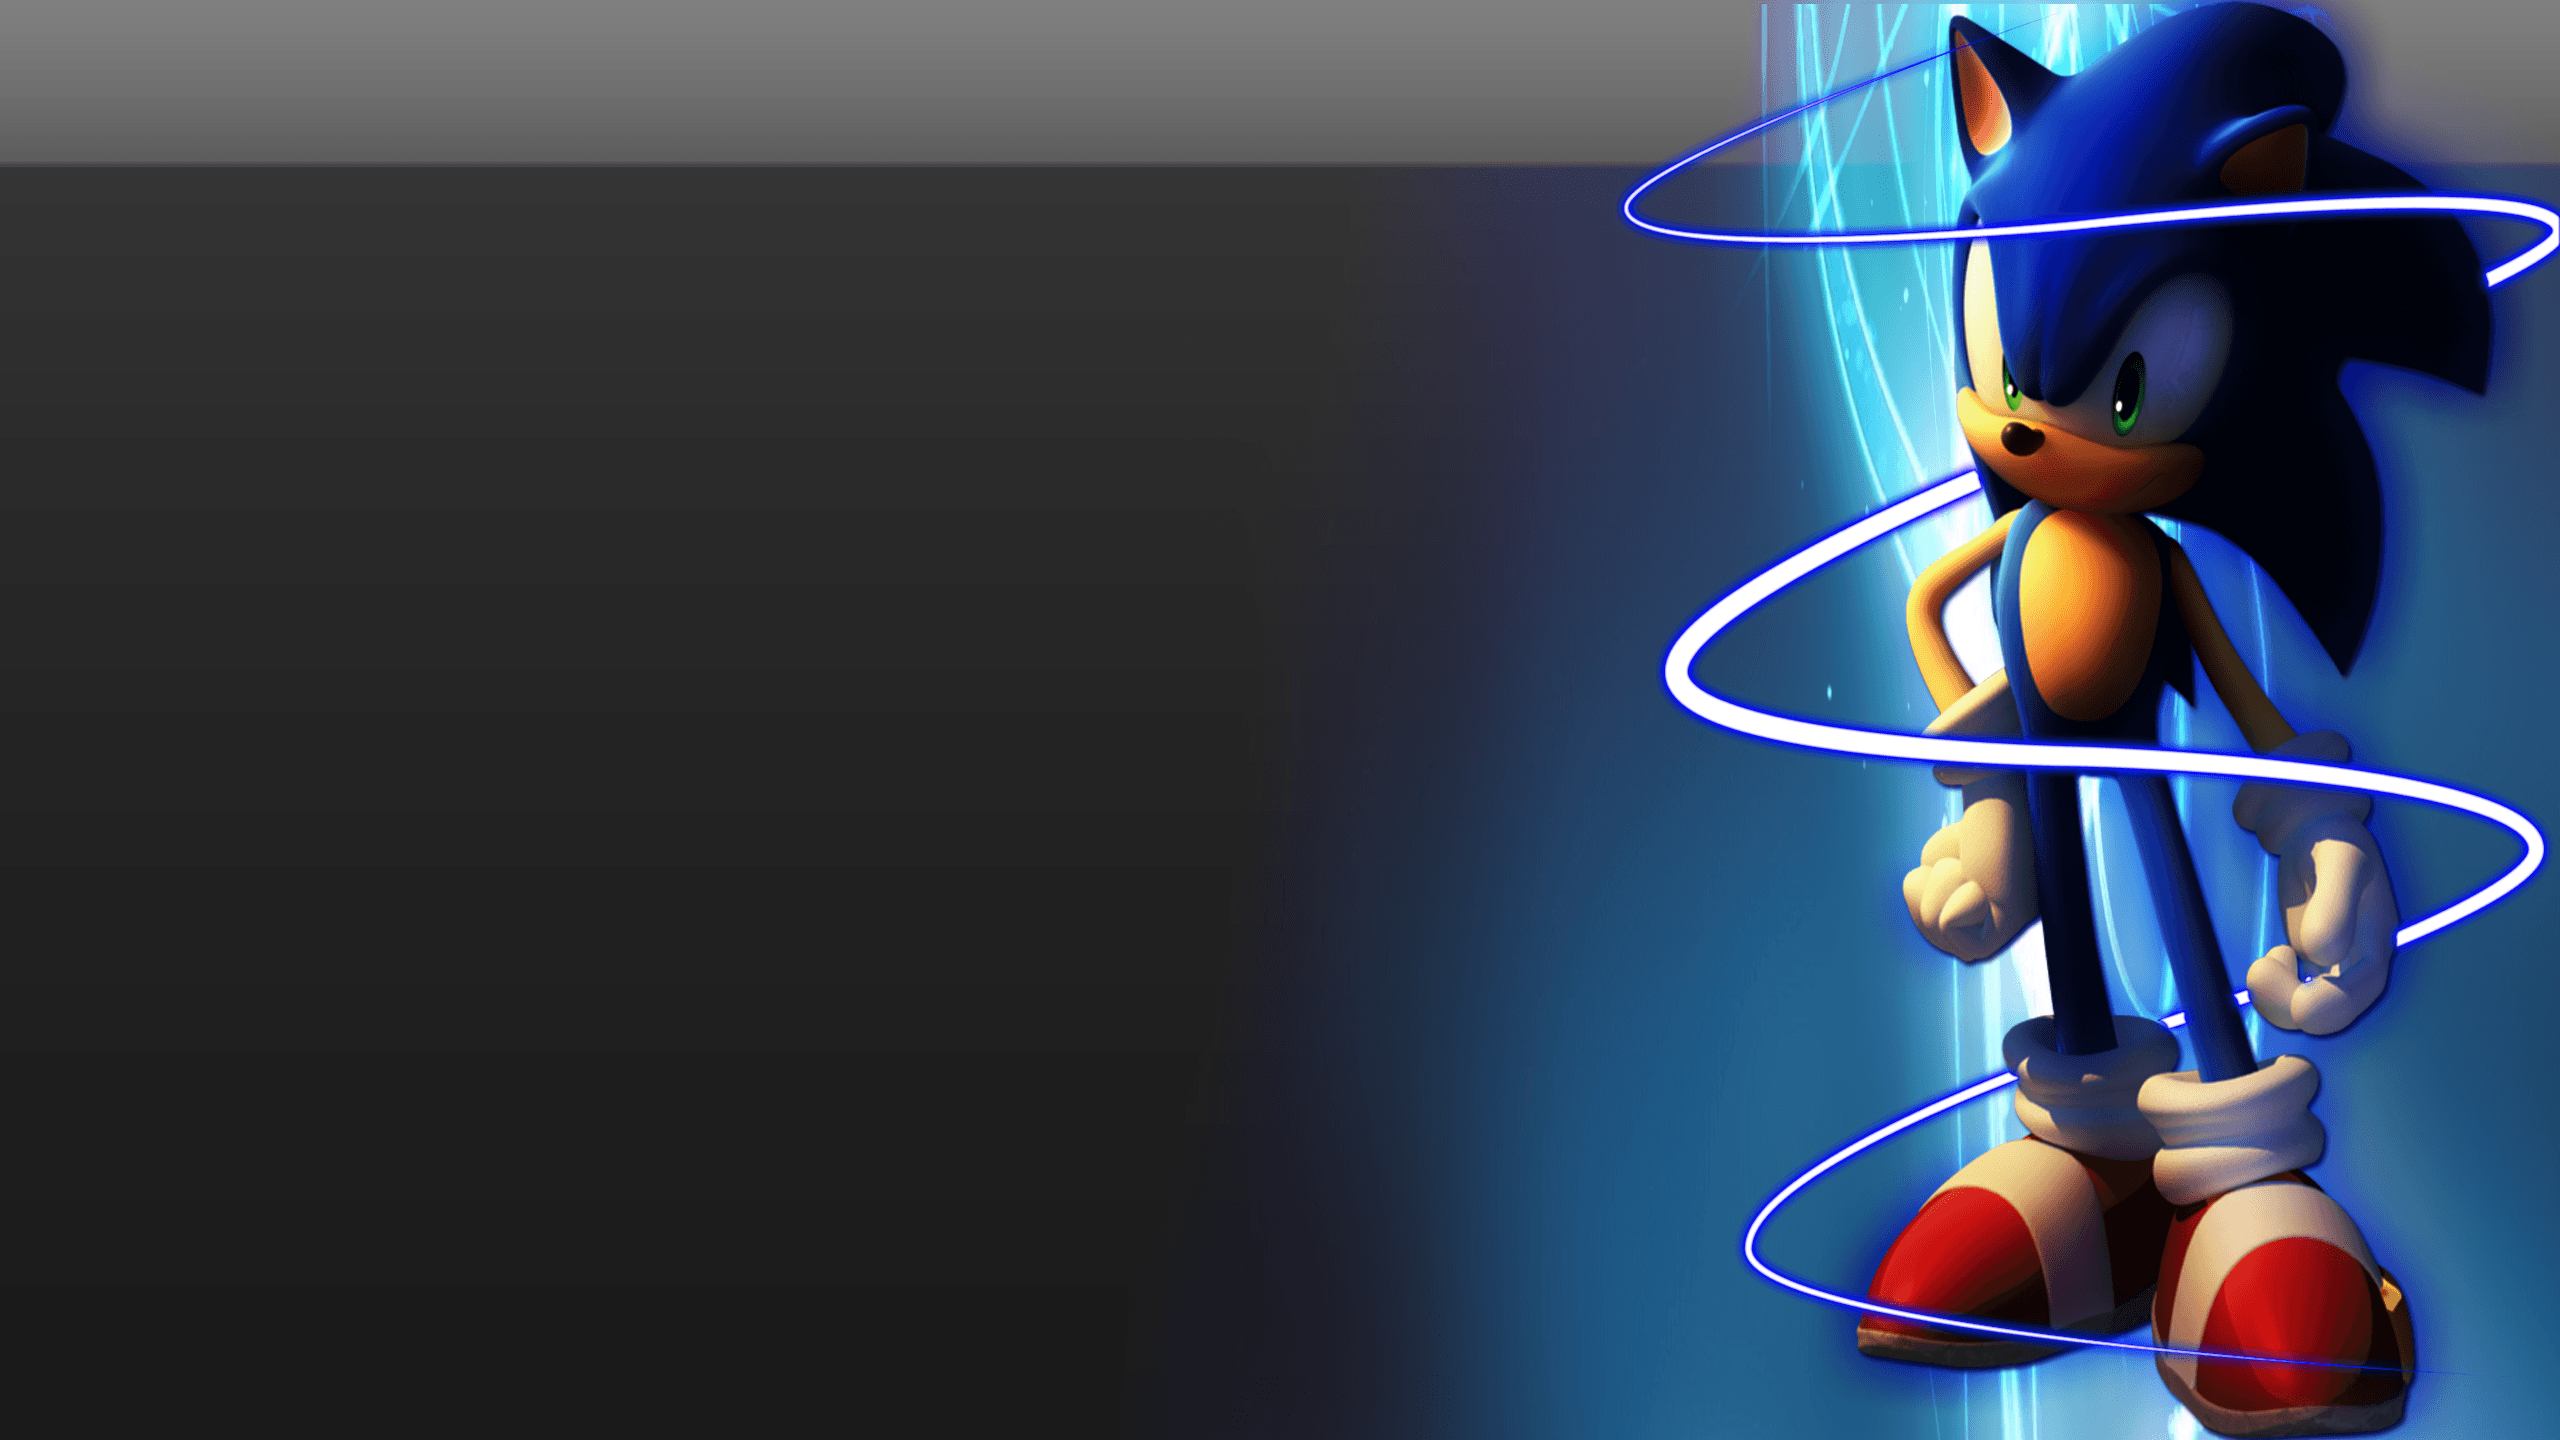 New Sonic Image View Wallpaper